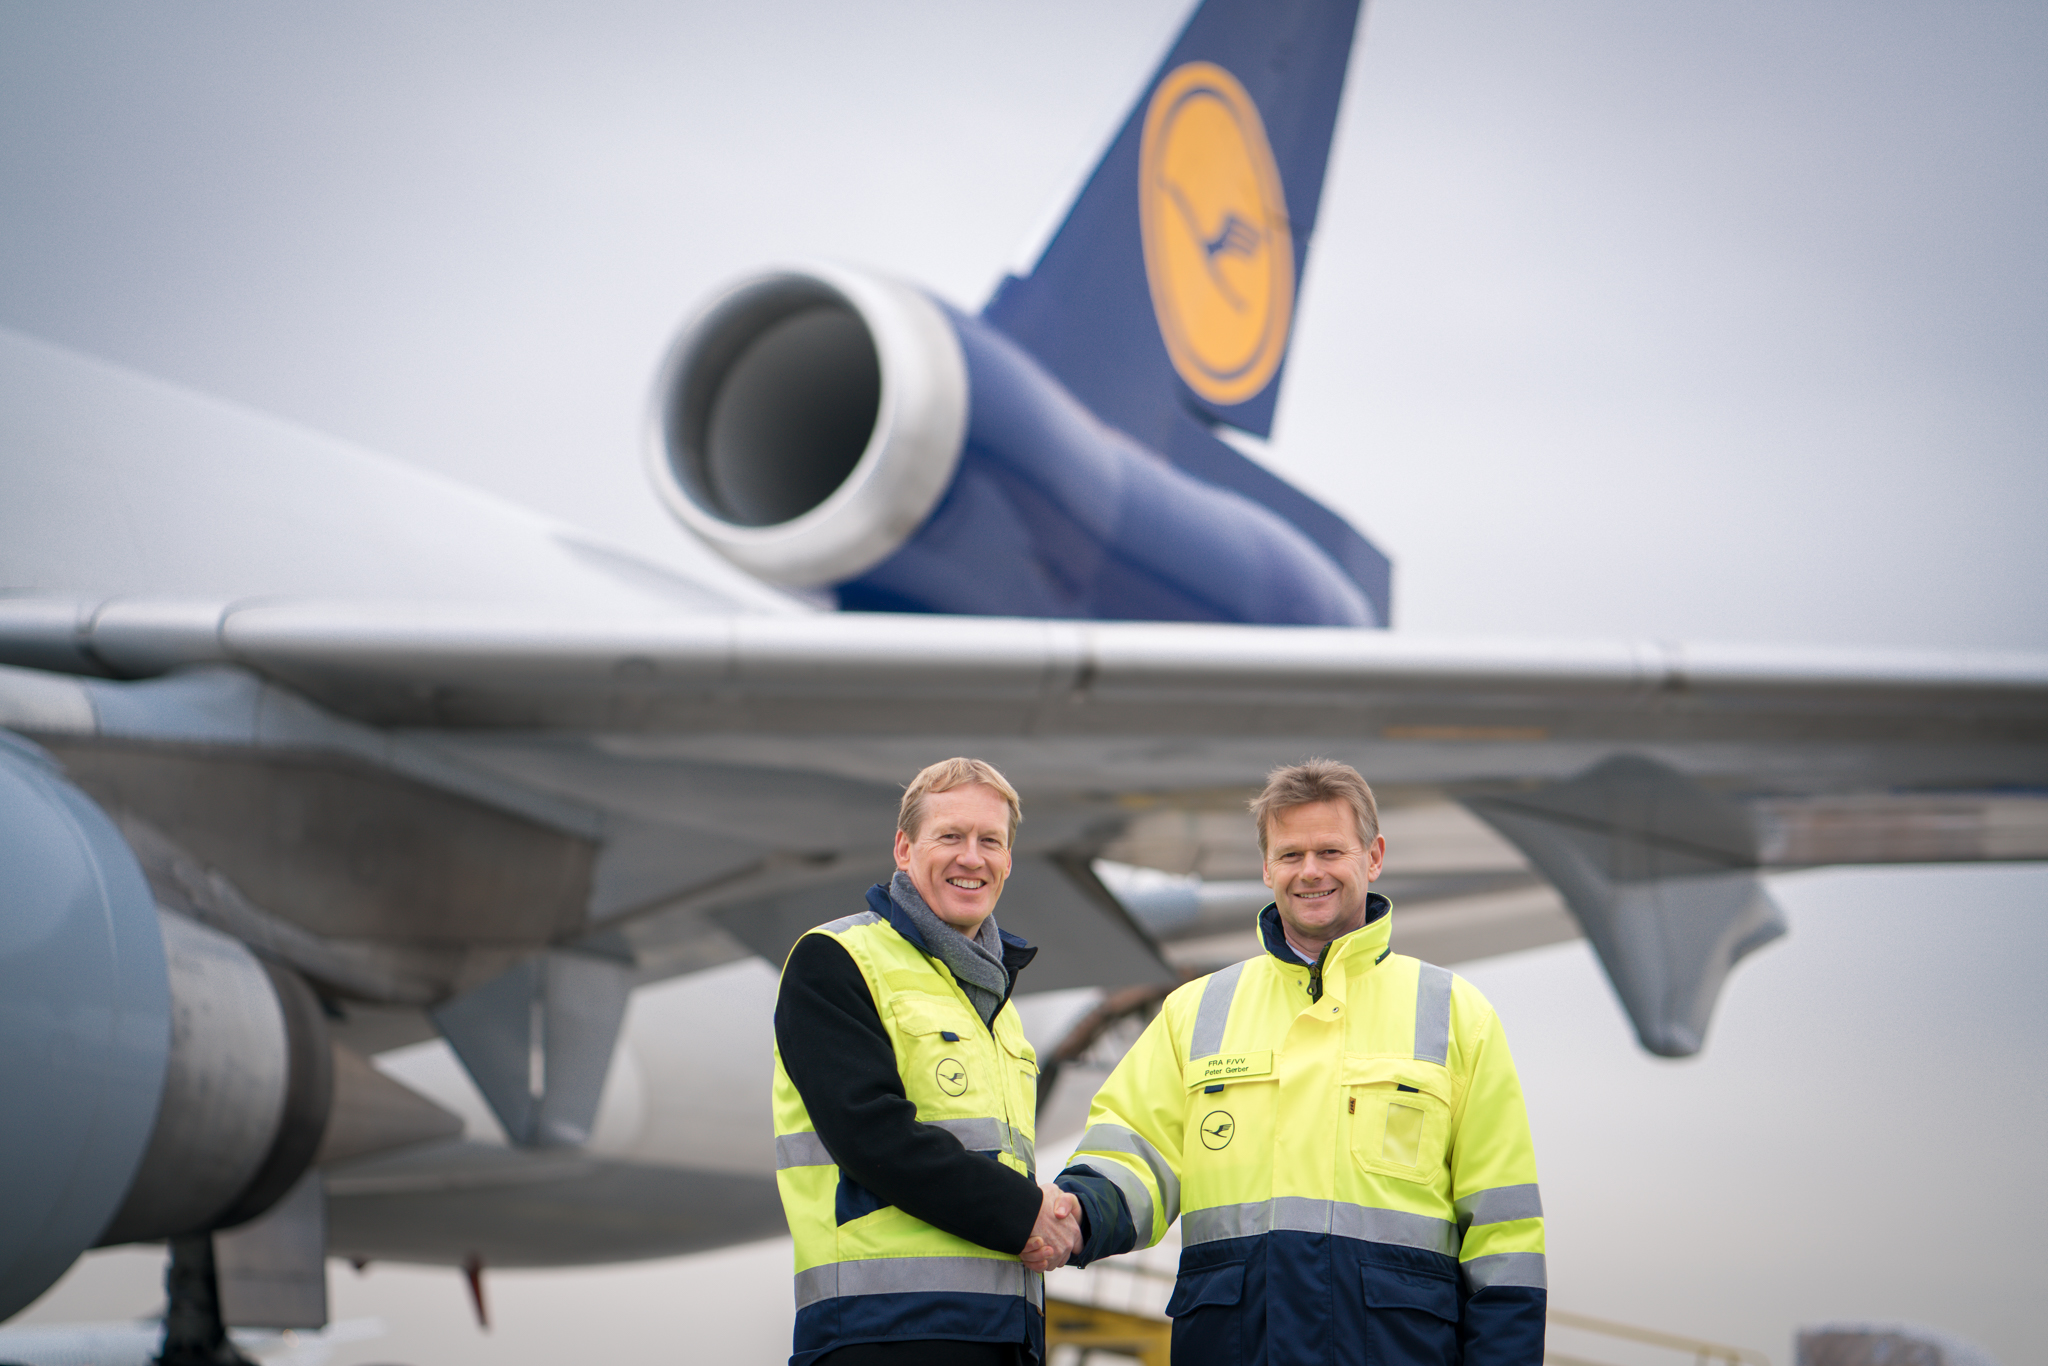 (l-r) Christian Reuter, secretary general of the German Red Cross and Peter Gerber, CEO and chairman of the Executive Board of Lufthansa Cargo.